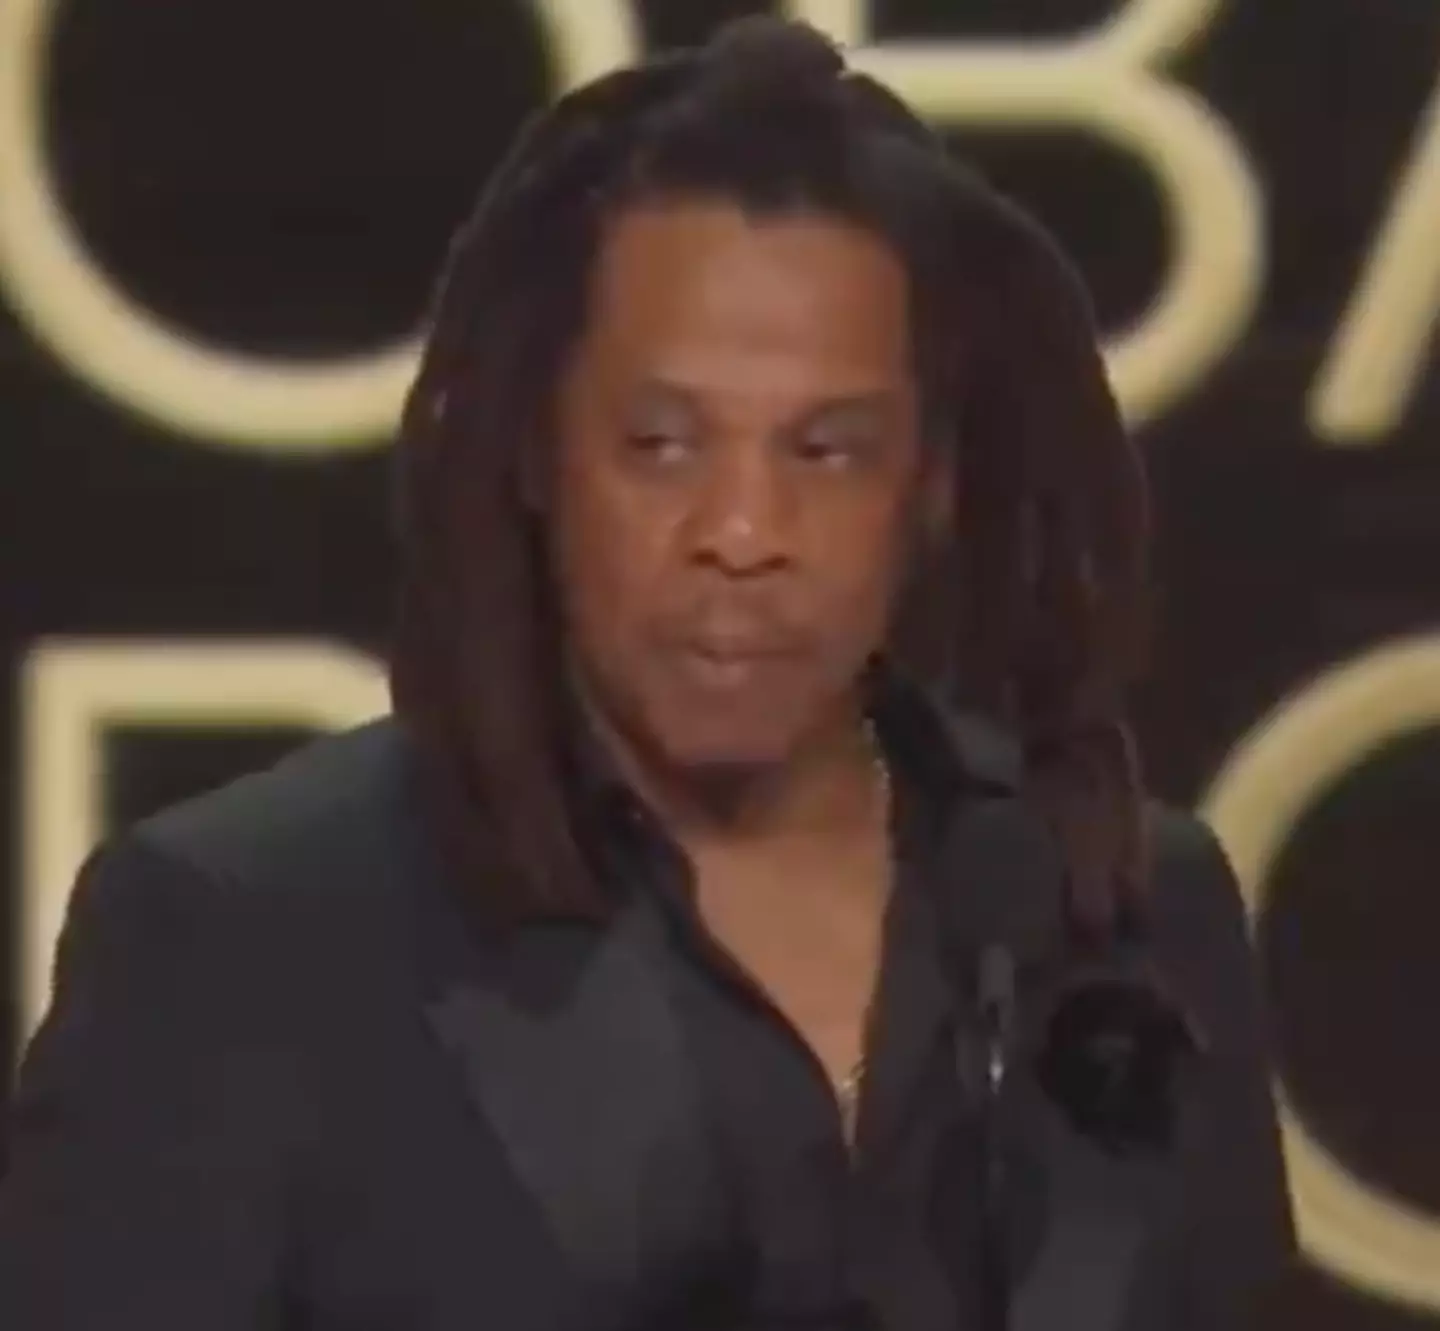 Jay-Z threw a lot of shade on the Grammys during his award speech.